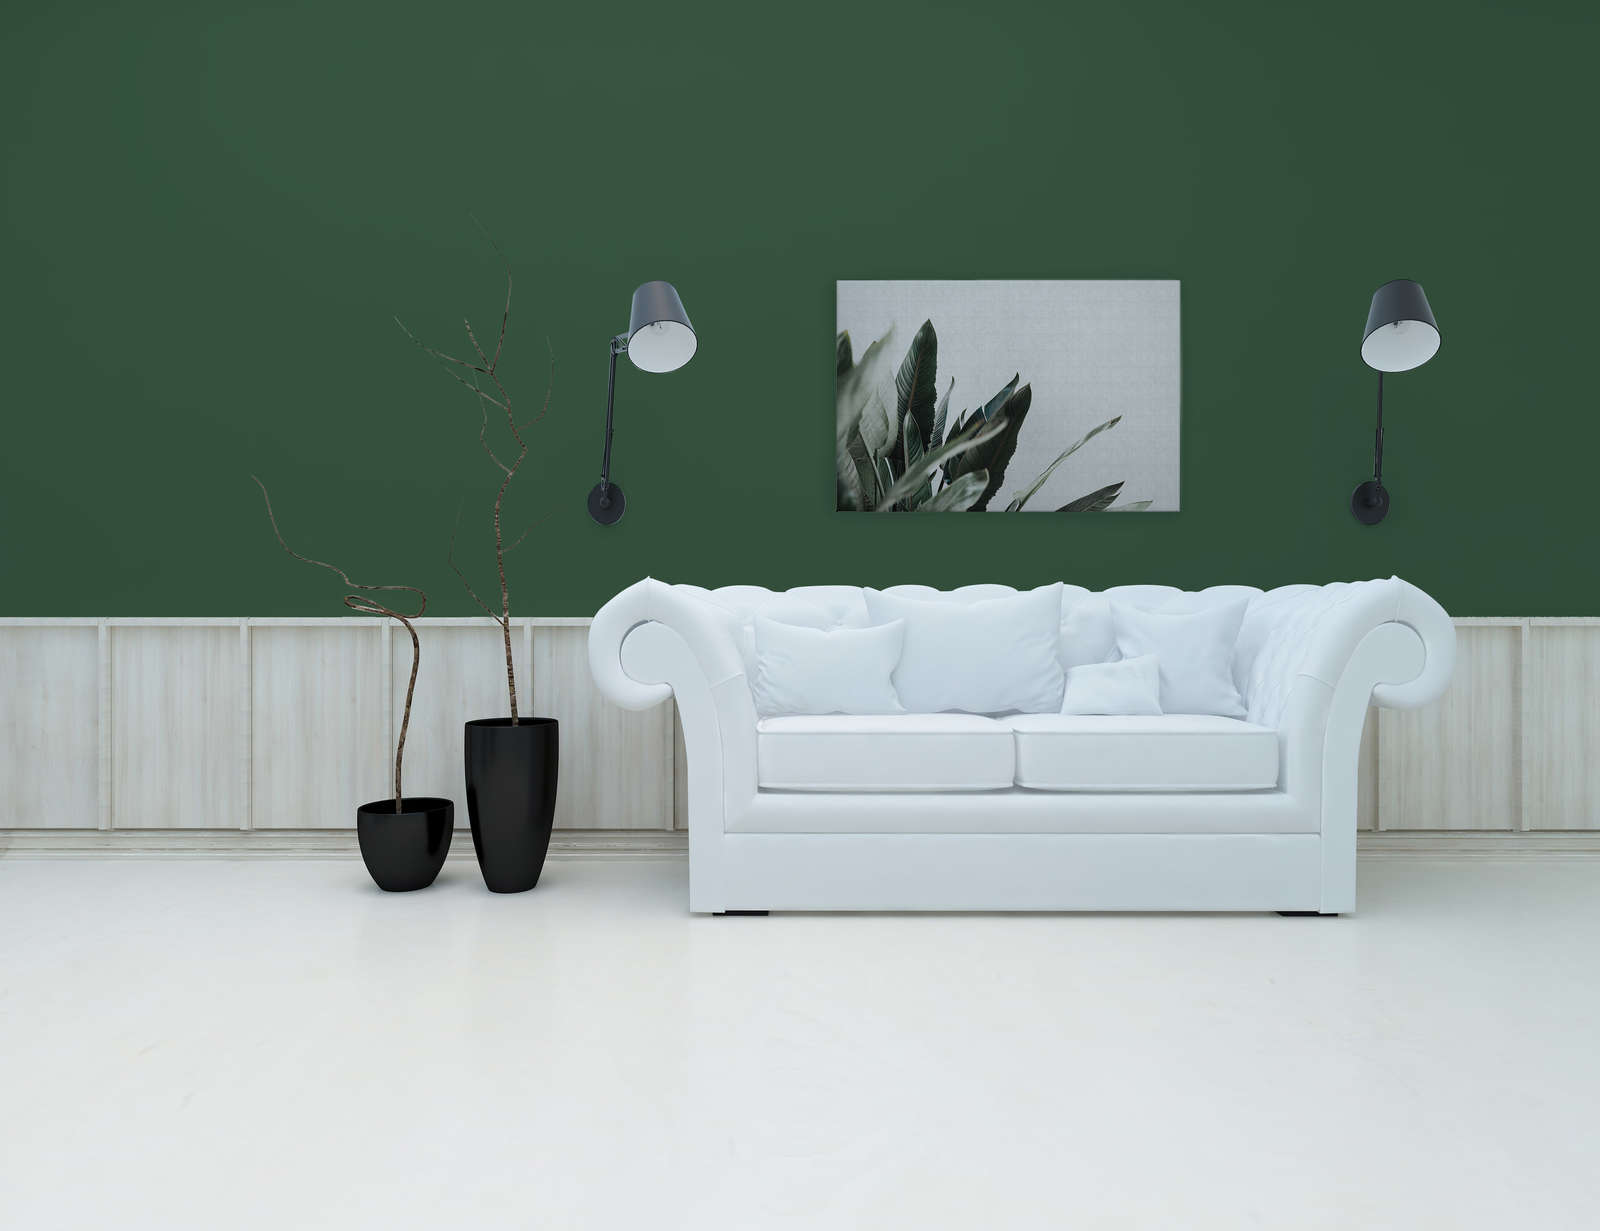             Urban jungle 1 - Canvas painting with palm leaves in natural linen look - 0.90 m x 0.60 m
        